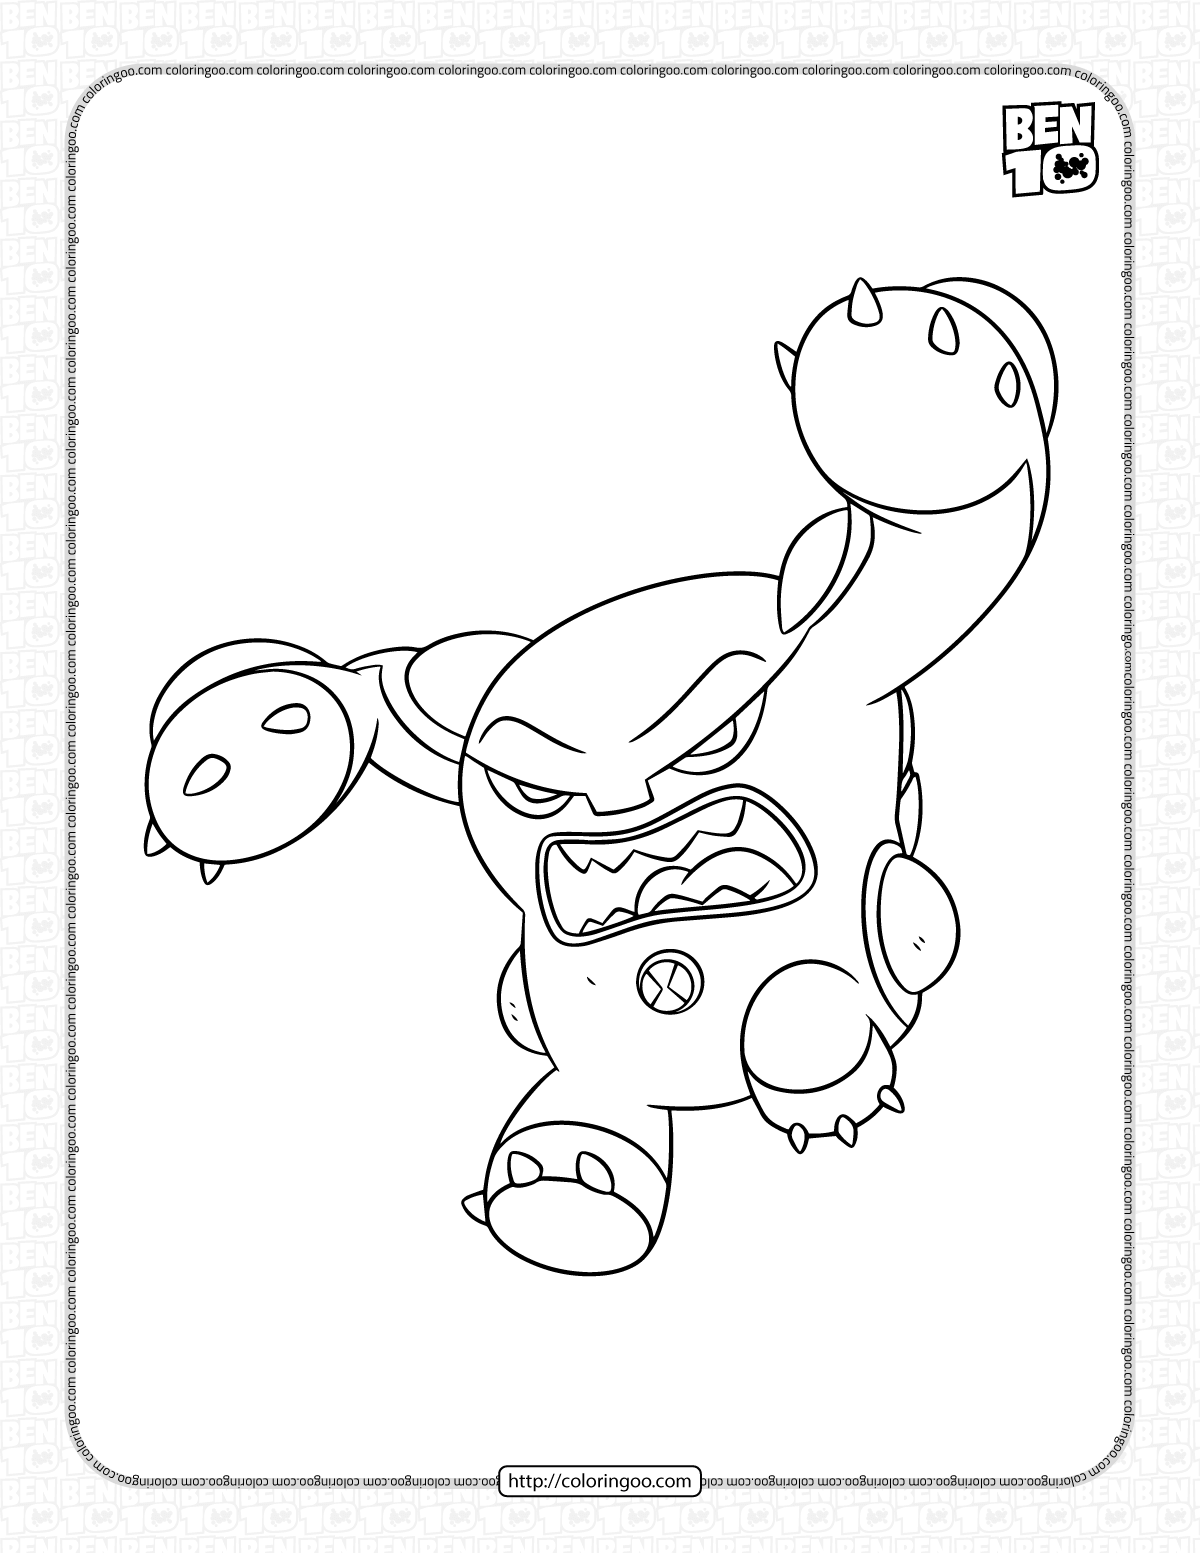 ben 10 cannonbolt reboot coloring page for kids